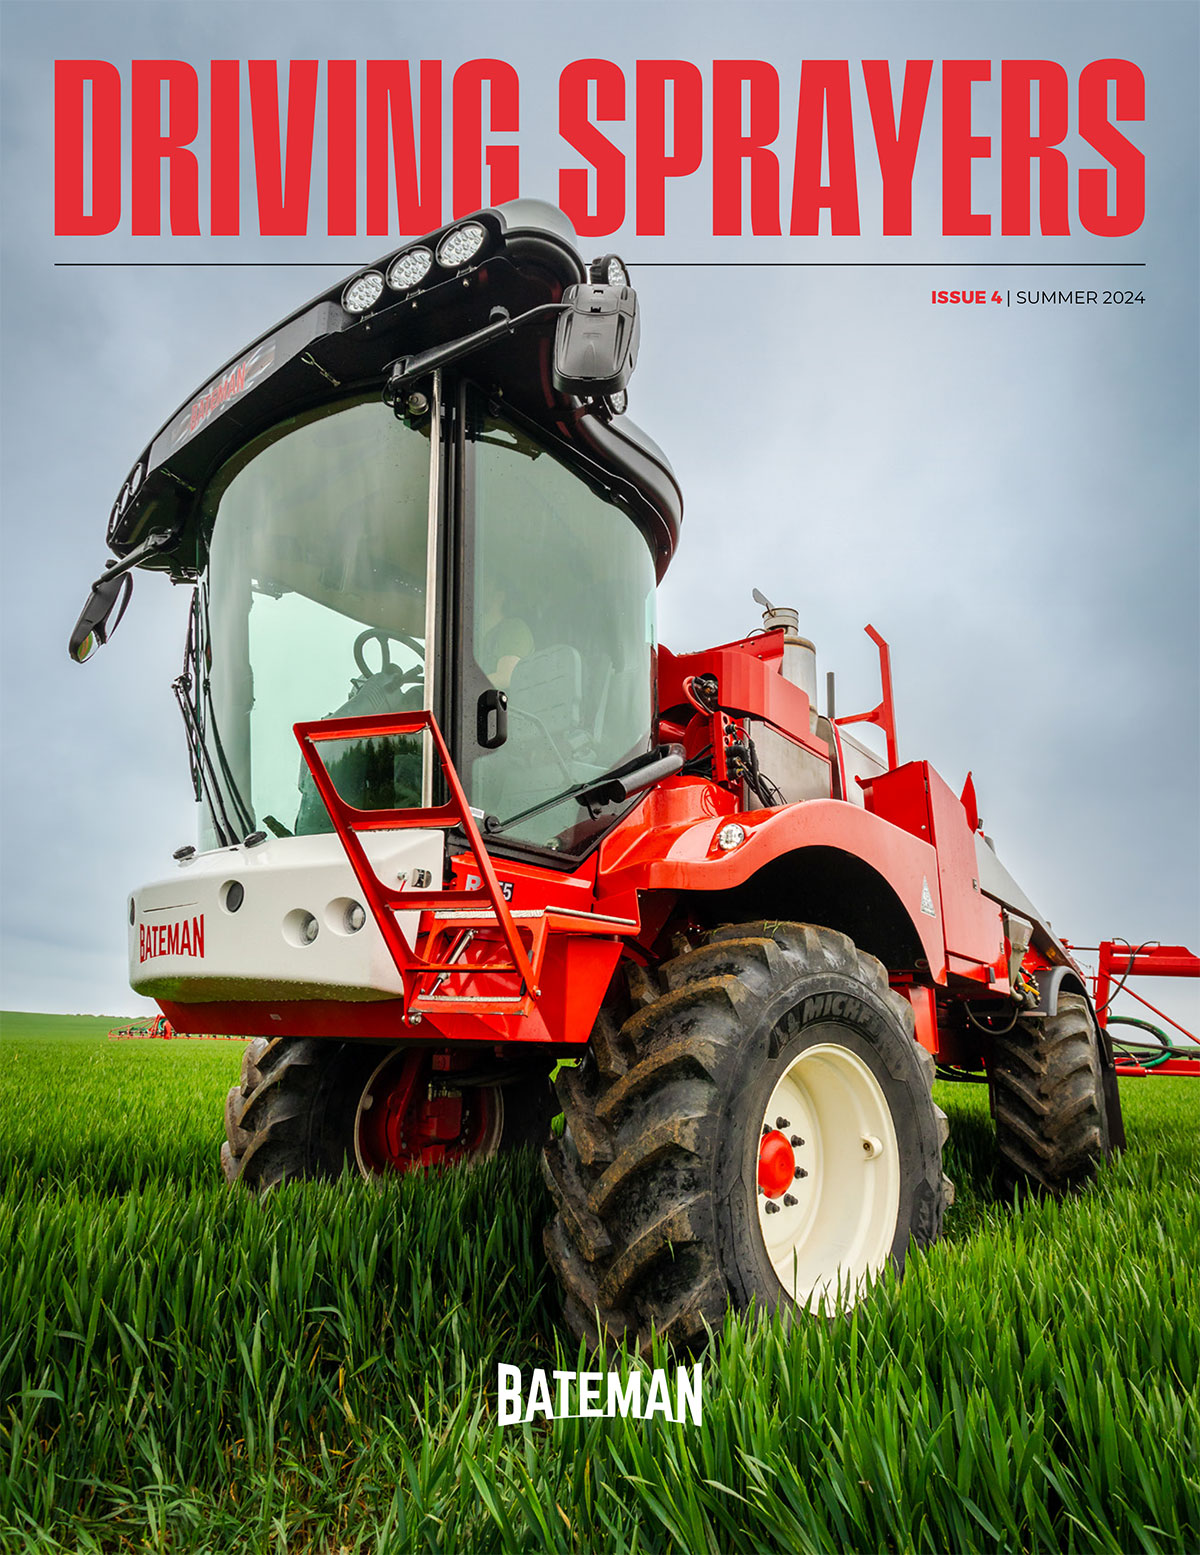 Driving Sprayers Magazine issue 4 cover